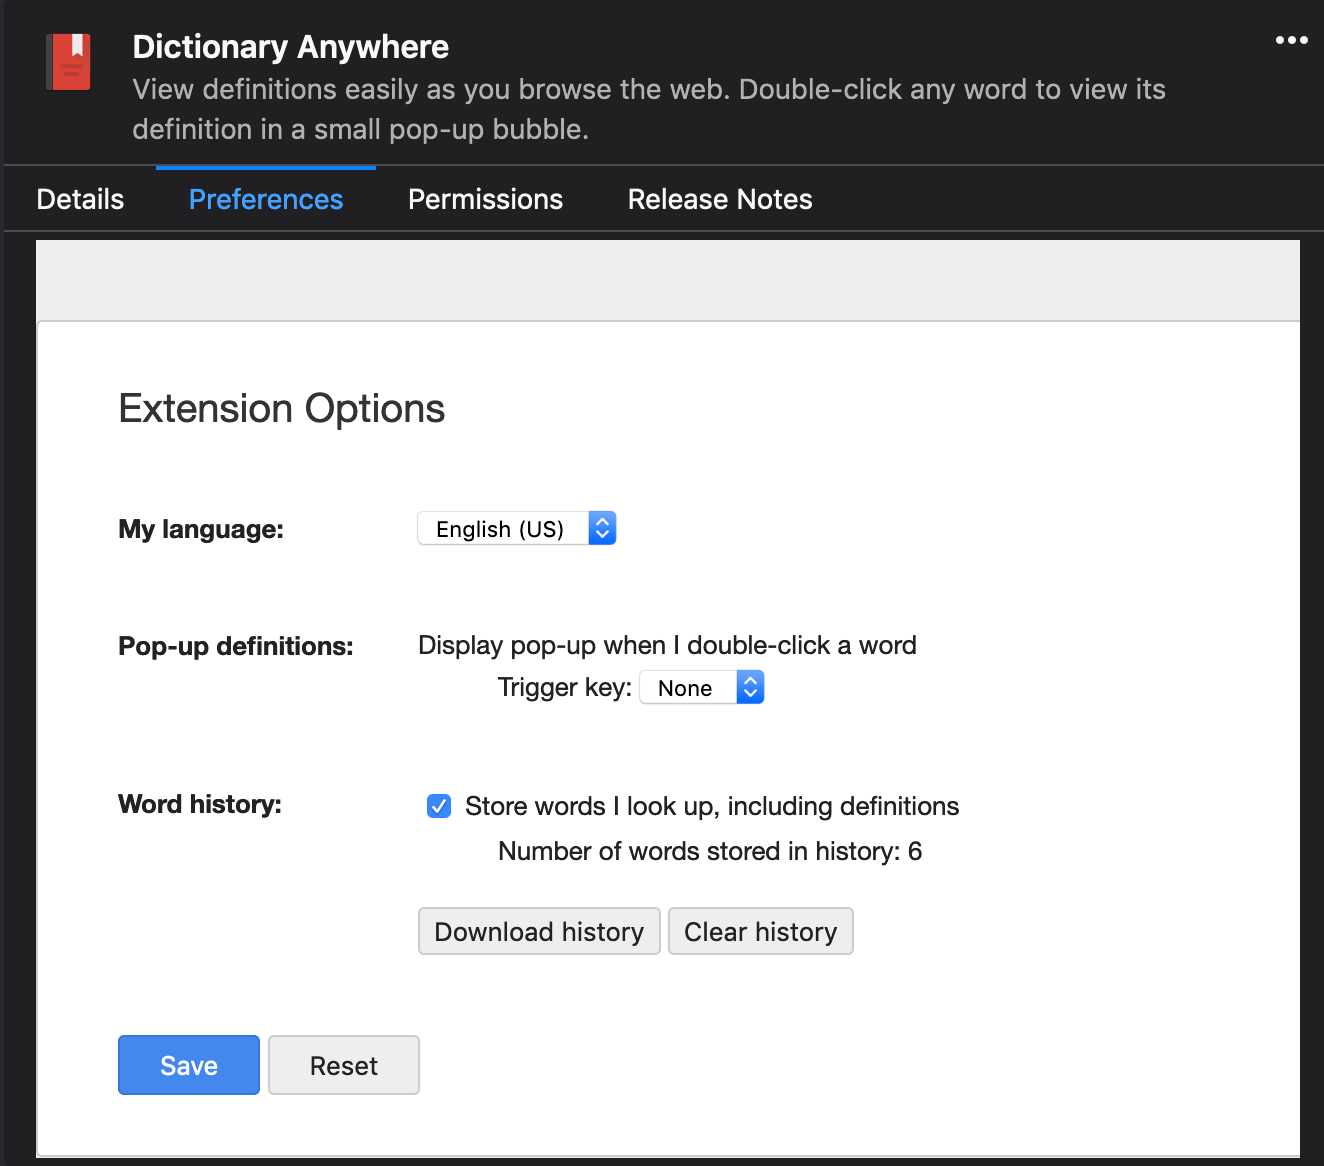 Dictionary Anywhere